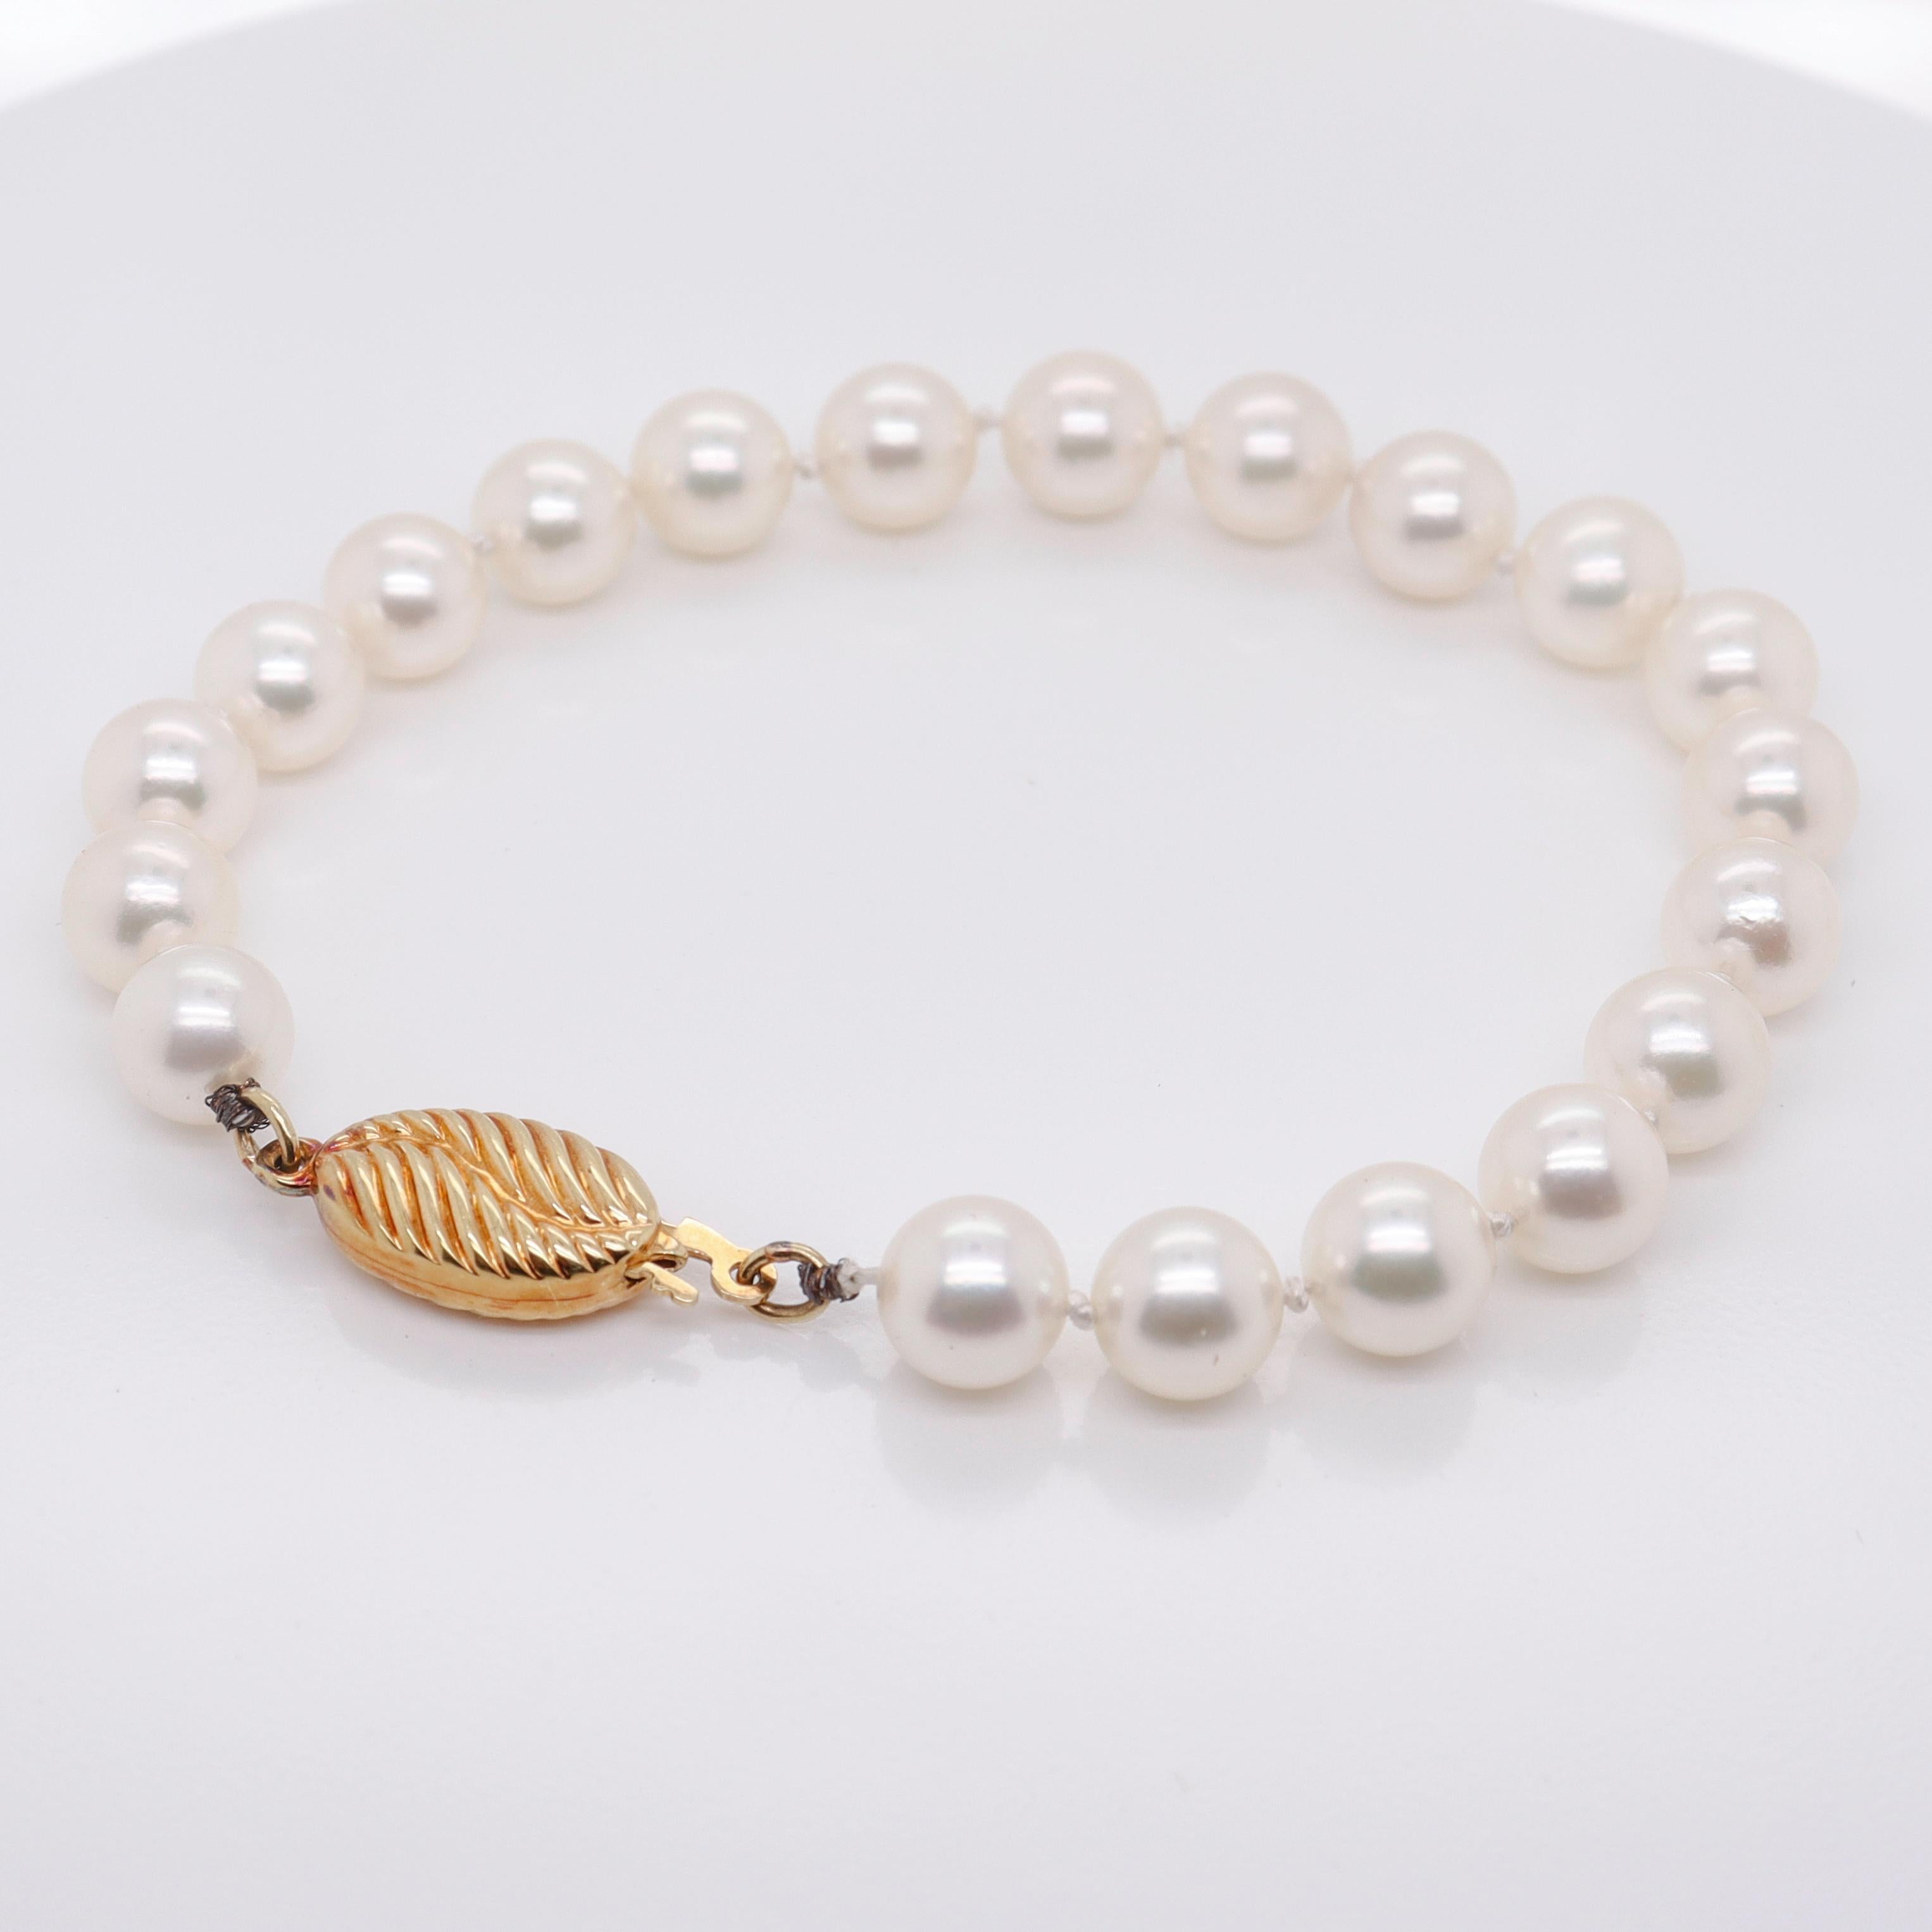 A fine vintage 18k gold & cultured pearl single strand bracelet.

With 7 - 7.5 mm round white pearls with fine color and lustre. 

Set with a 18k gold clasp. 

Originally retailed by Shapur Mozafarian of San Francisco. Together with its original